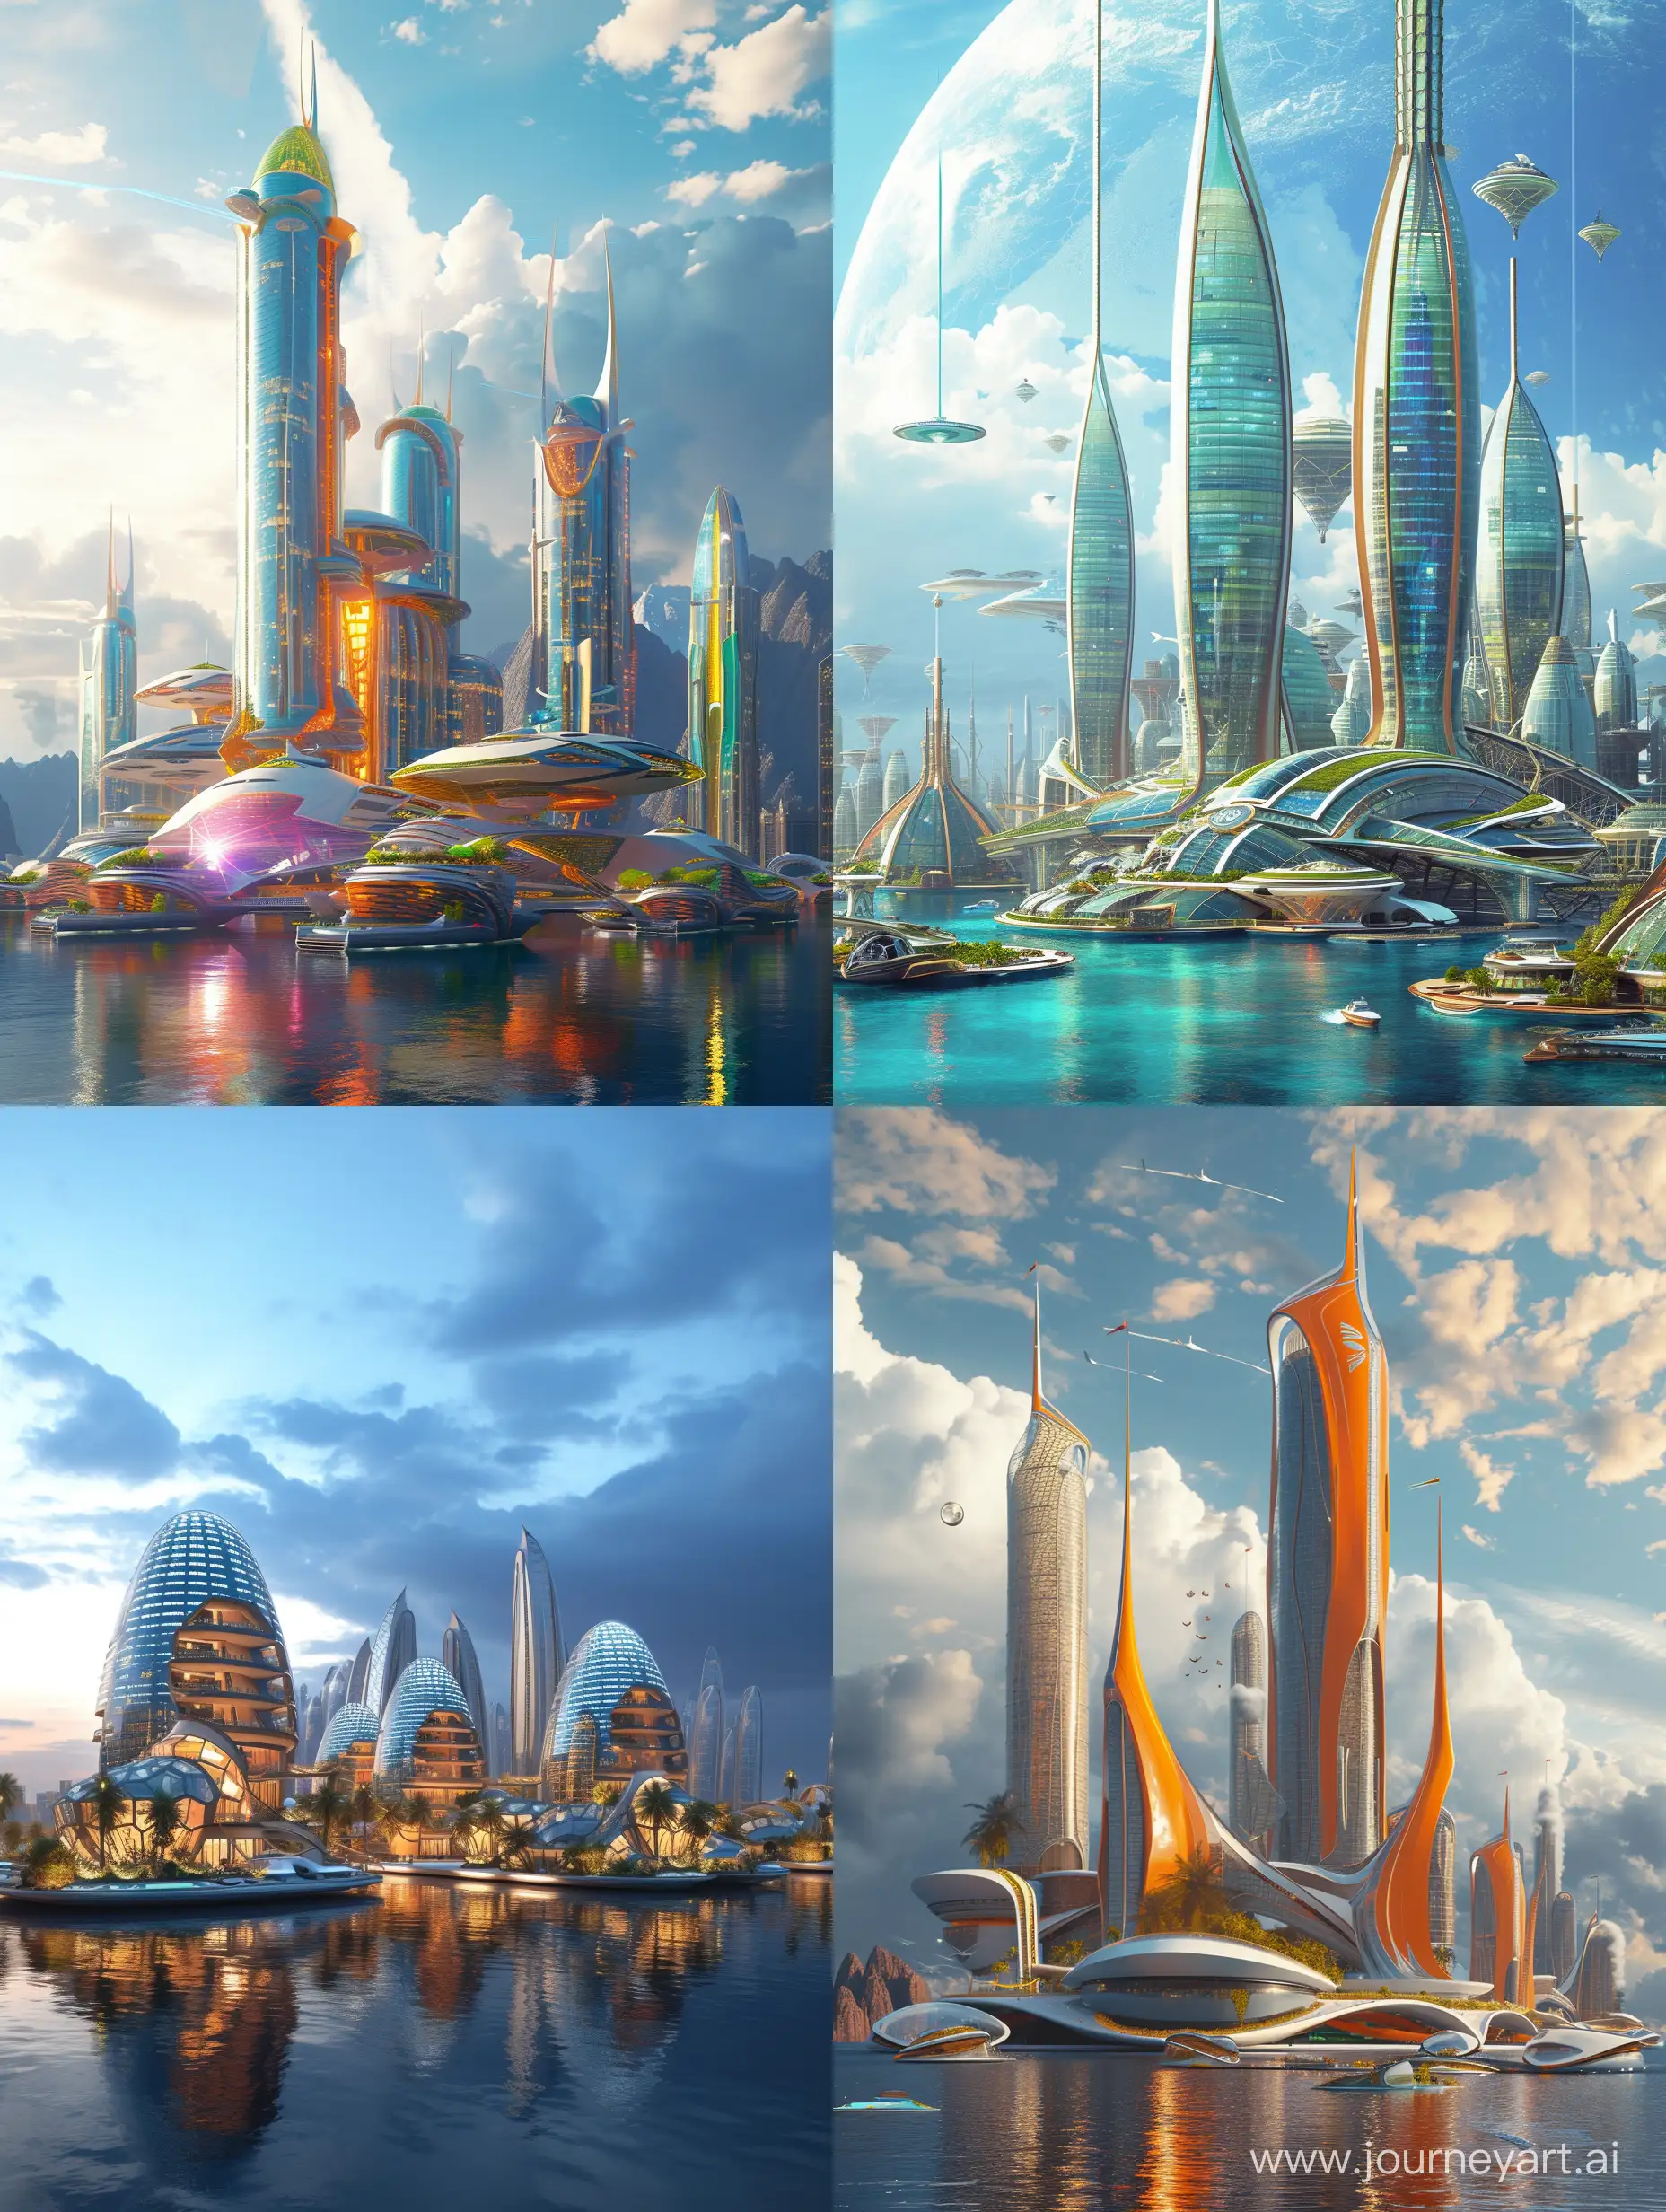 Futuristic-Floating-City-Skyline-with-Sustainable-Architecture